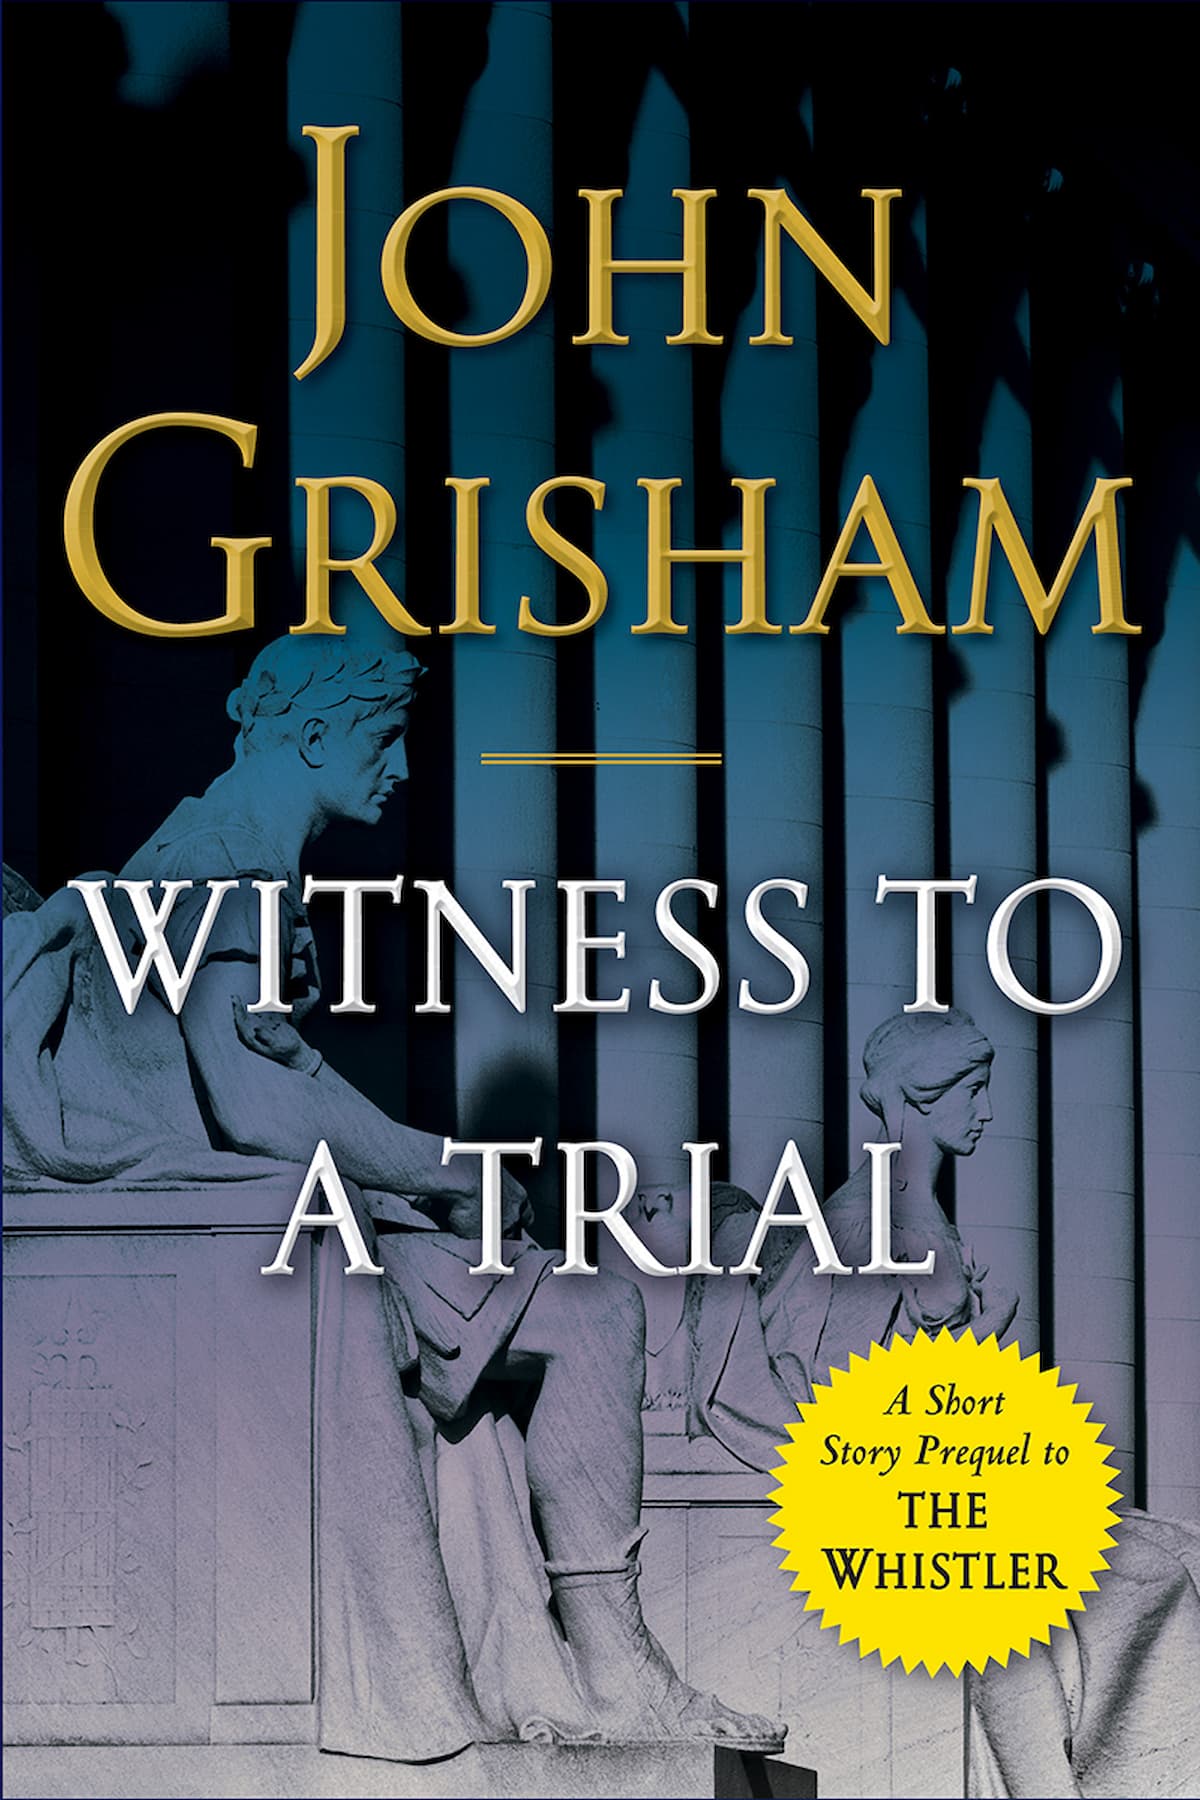 Witness to a Trial - John Grisham (The Whistler Series Book 1) can be a great help to those who seek to recharge their energy levels during the holidays.